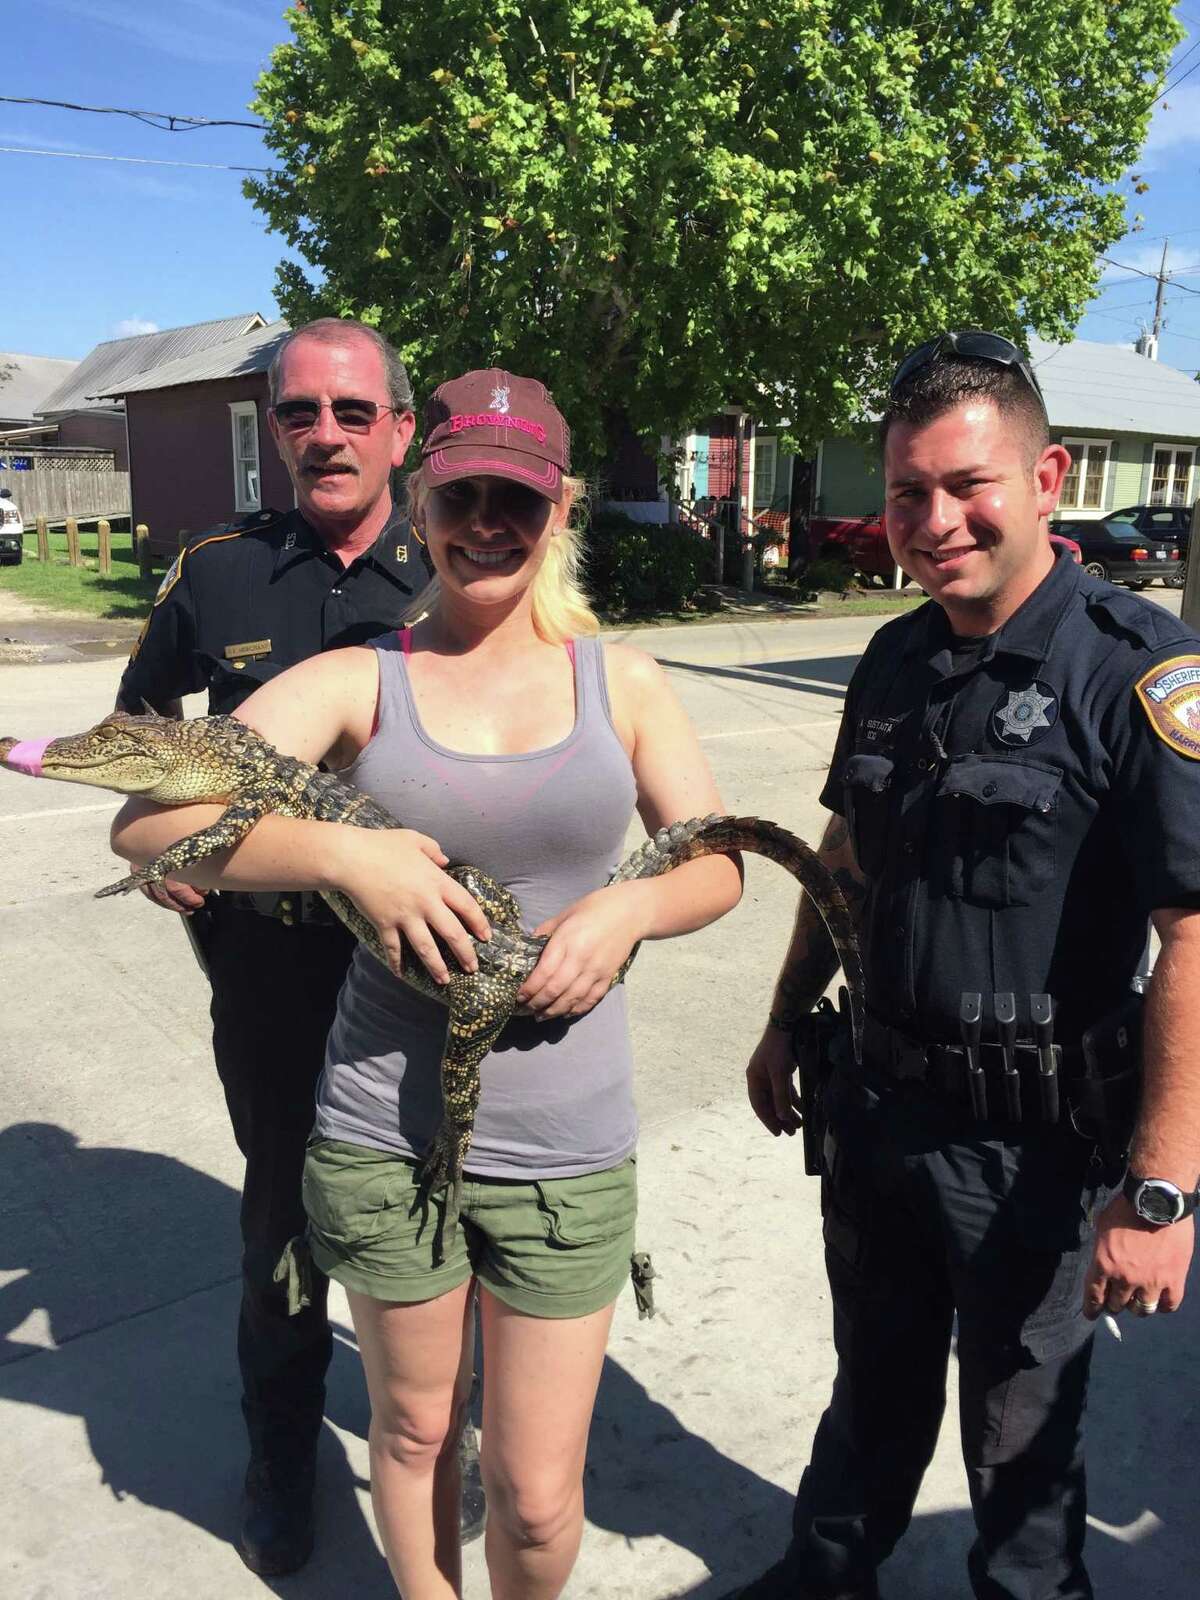 Part-time gator hunter Christy Kroboth (pictured) has also been busy this week catching gators in her free time away from her day job.